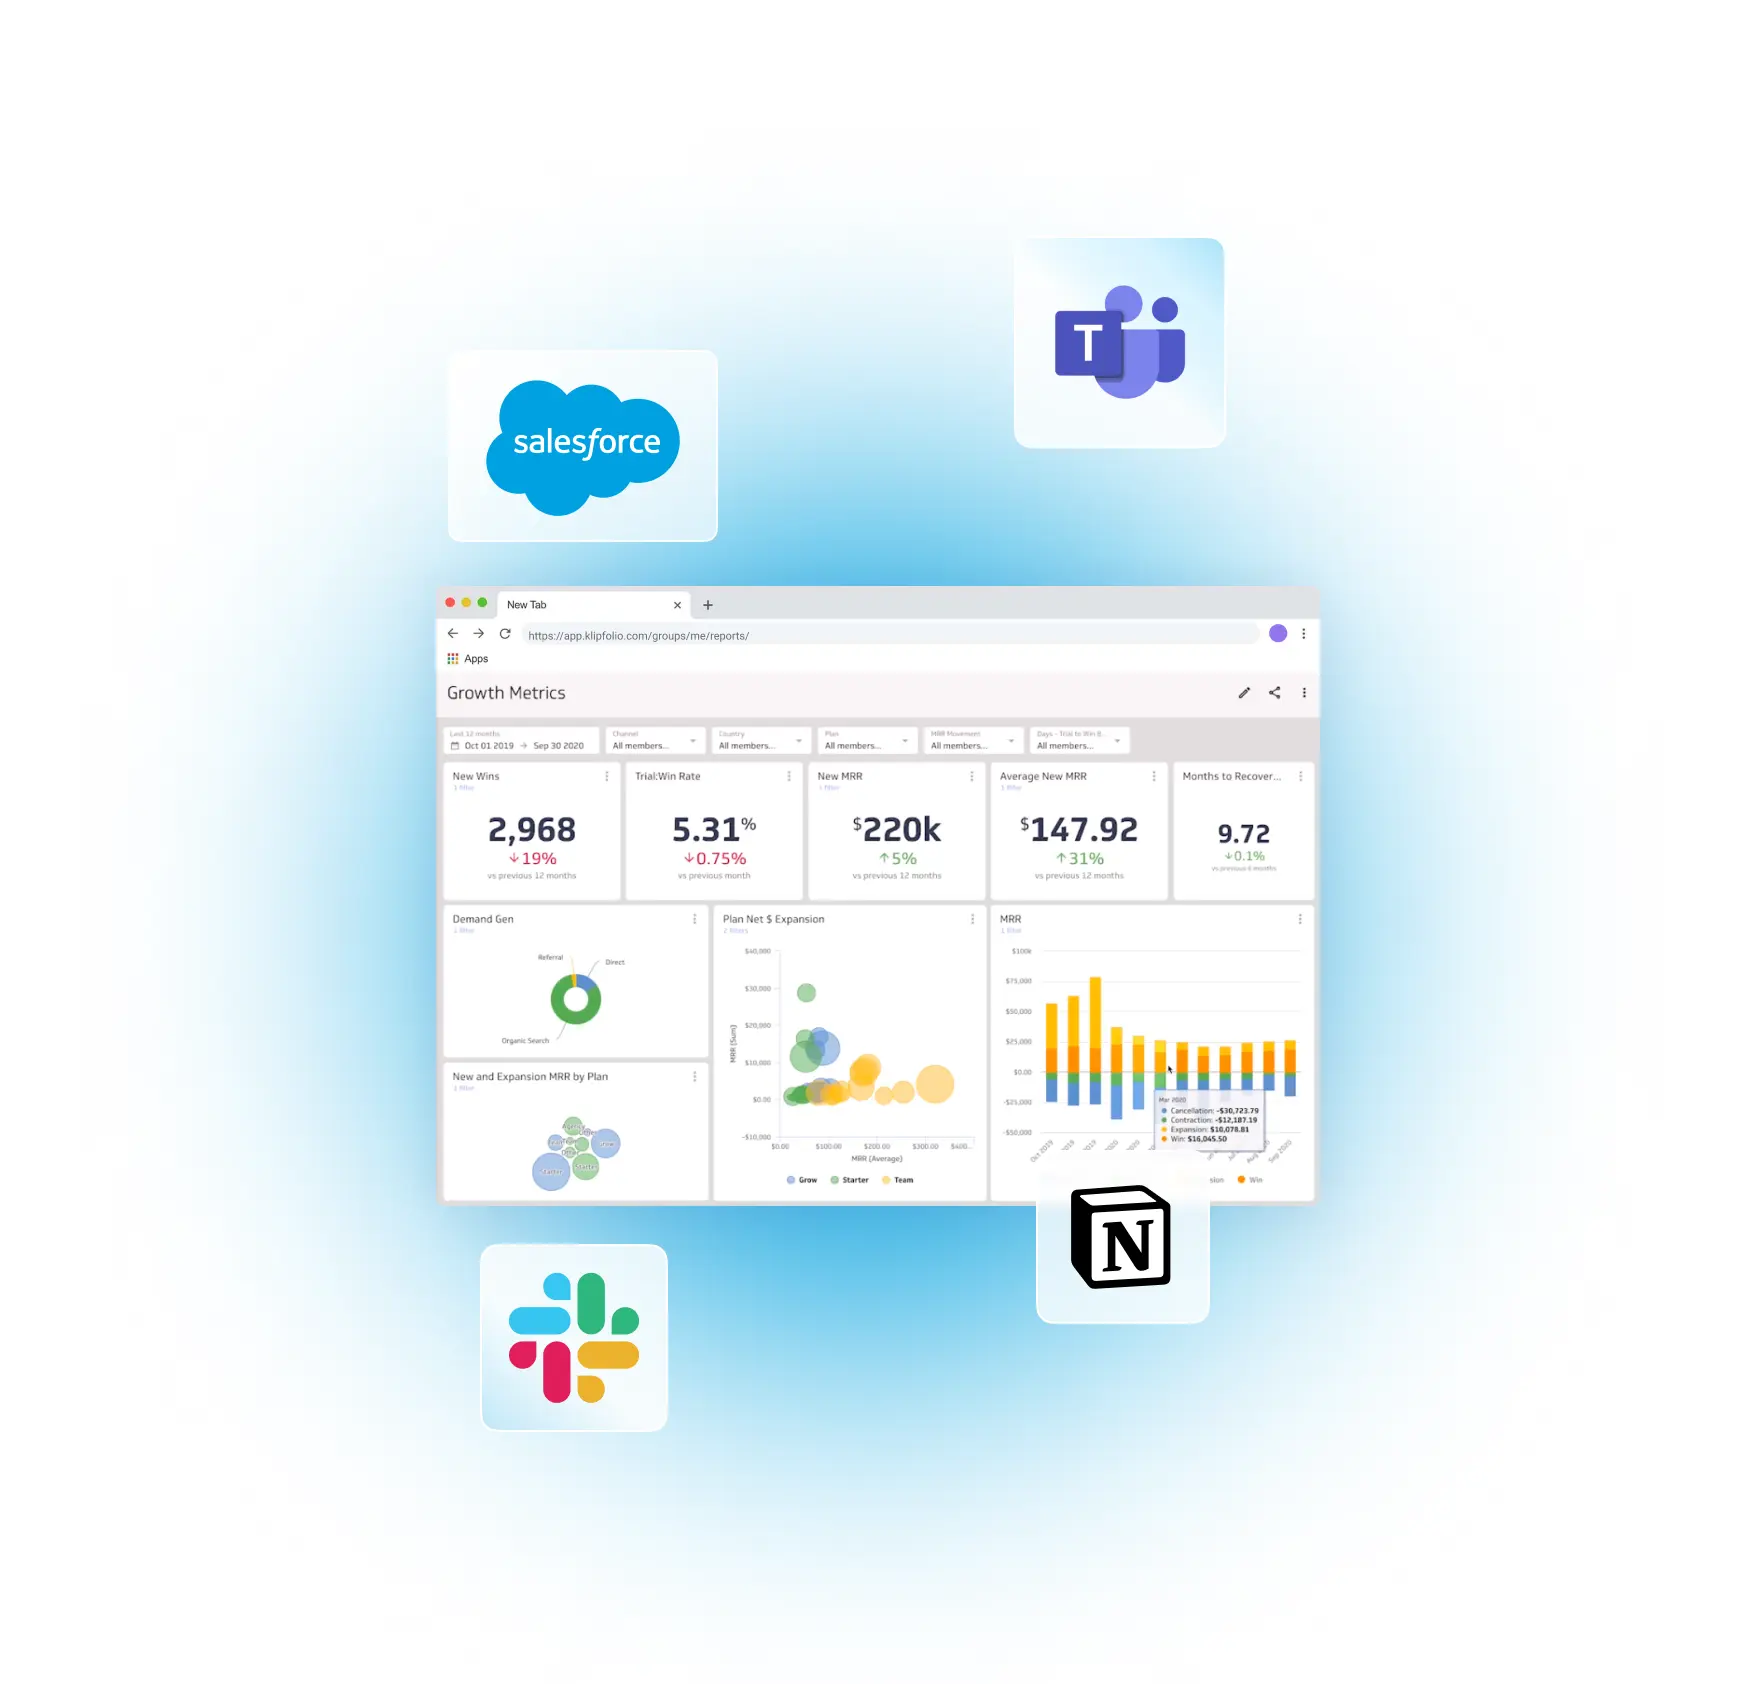 A Salesforce dashboard is open in a browser tab